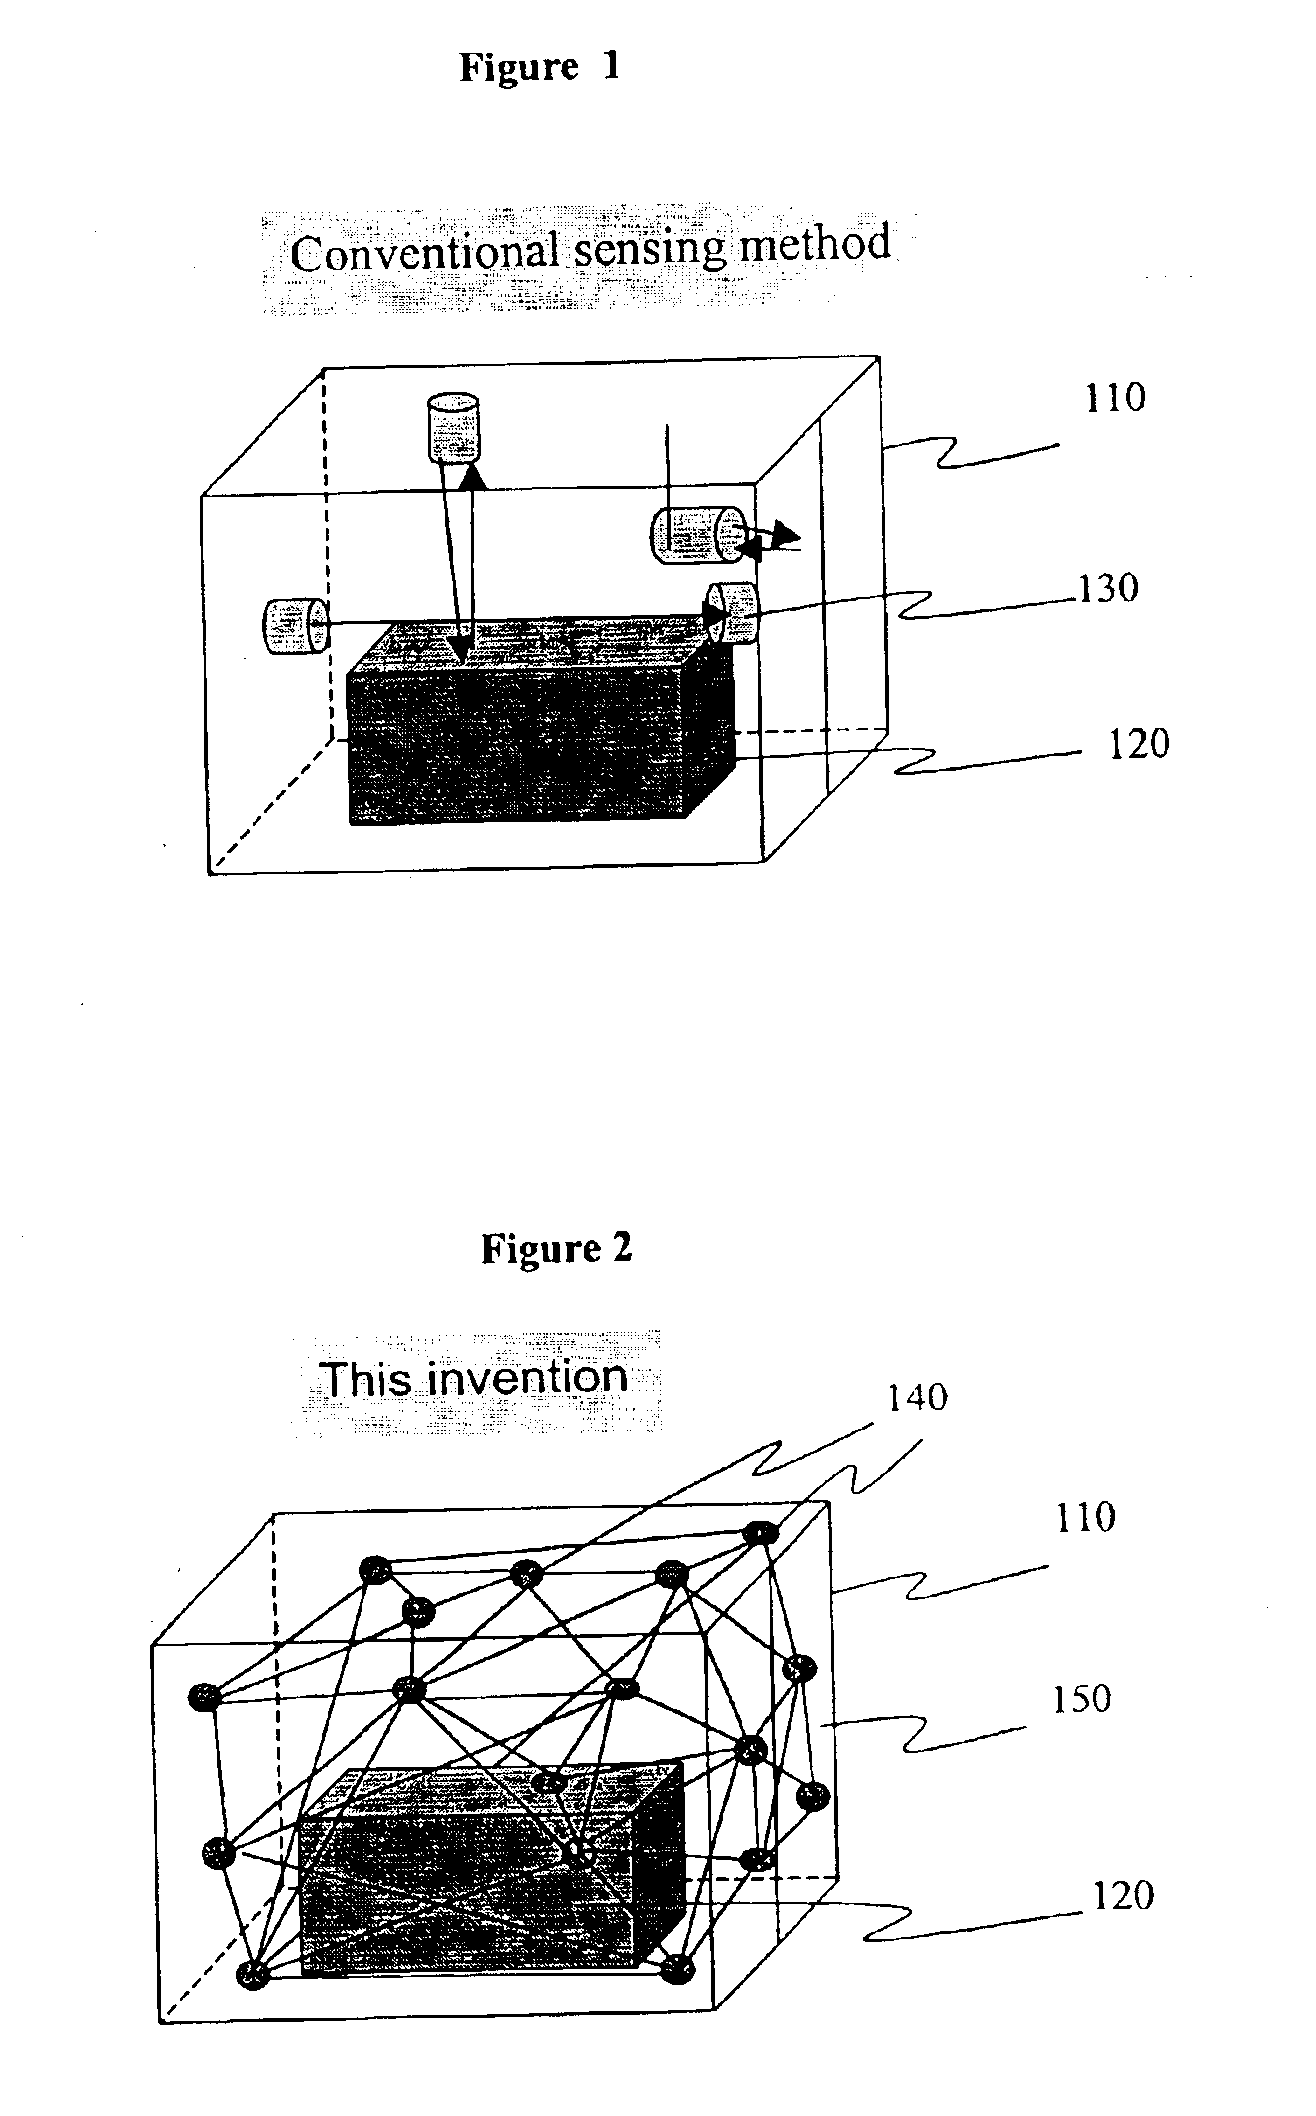 State surveillance system and method for an object and the adjacent space, and a surveillance system for freight containers